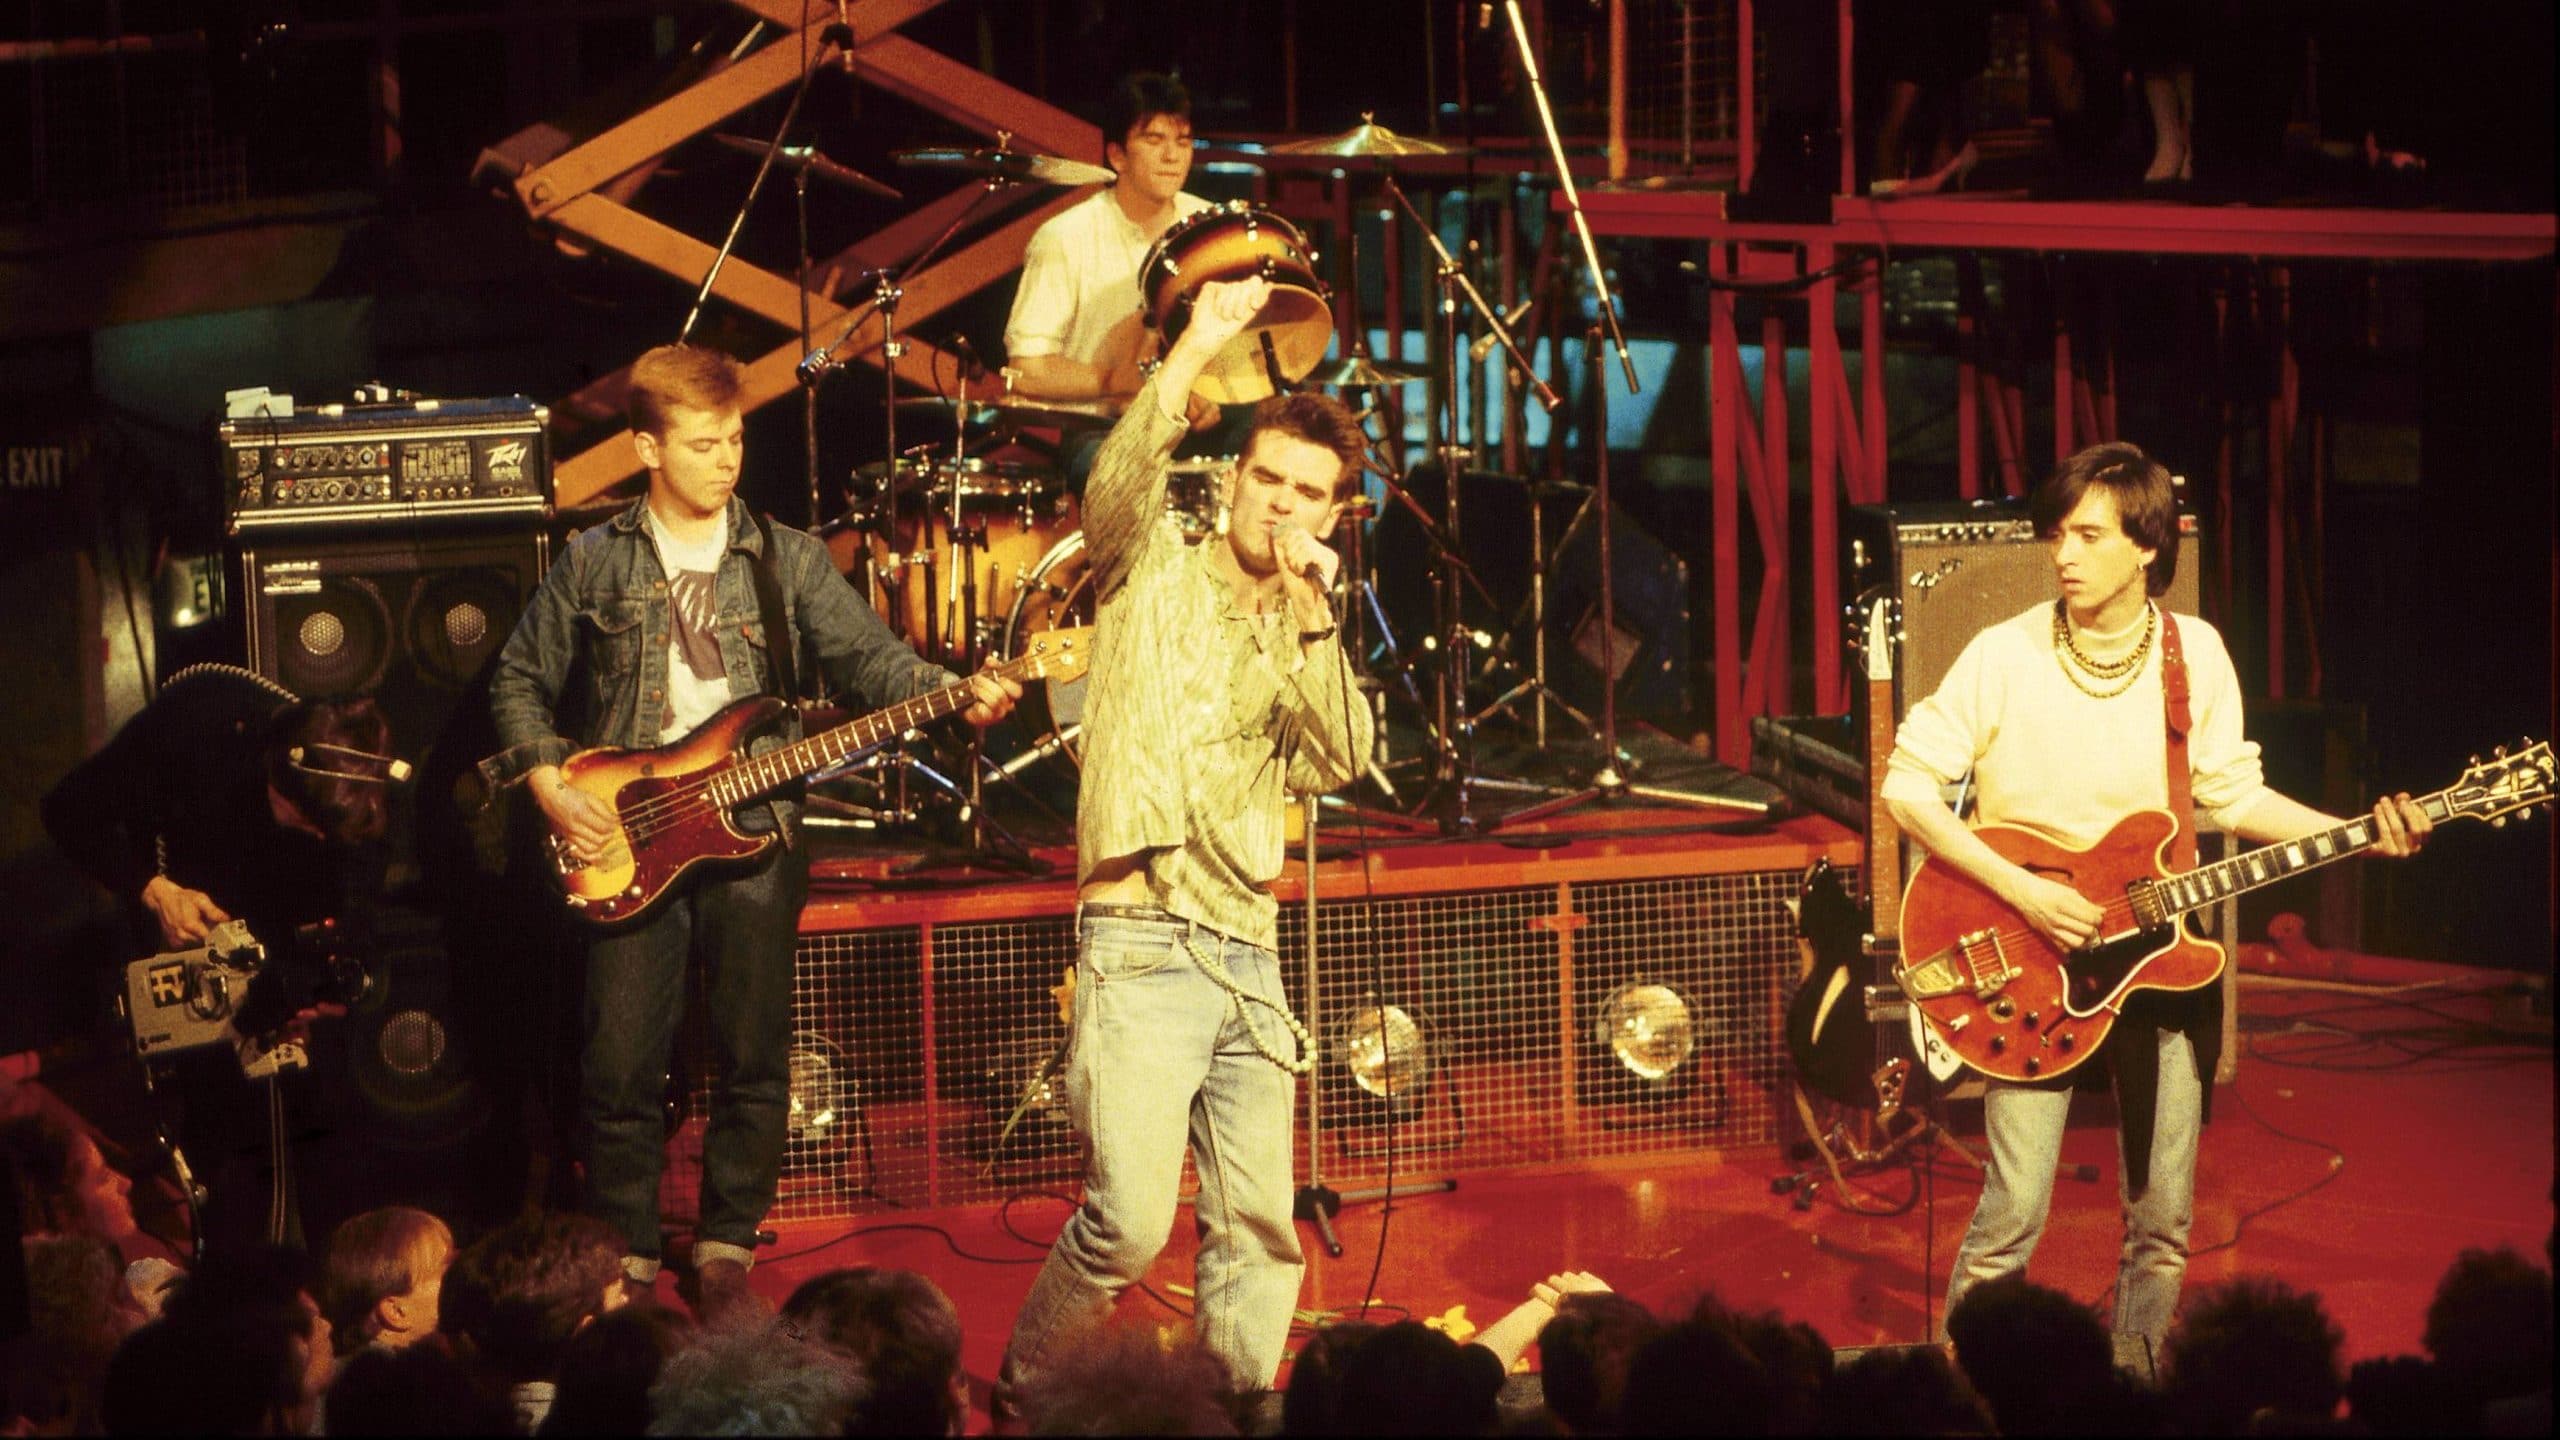 Morrissey and The Smiths performing